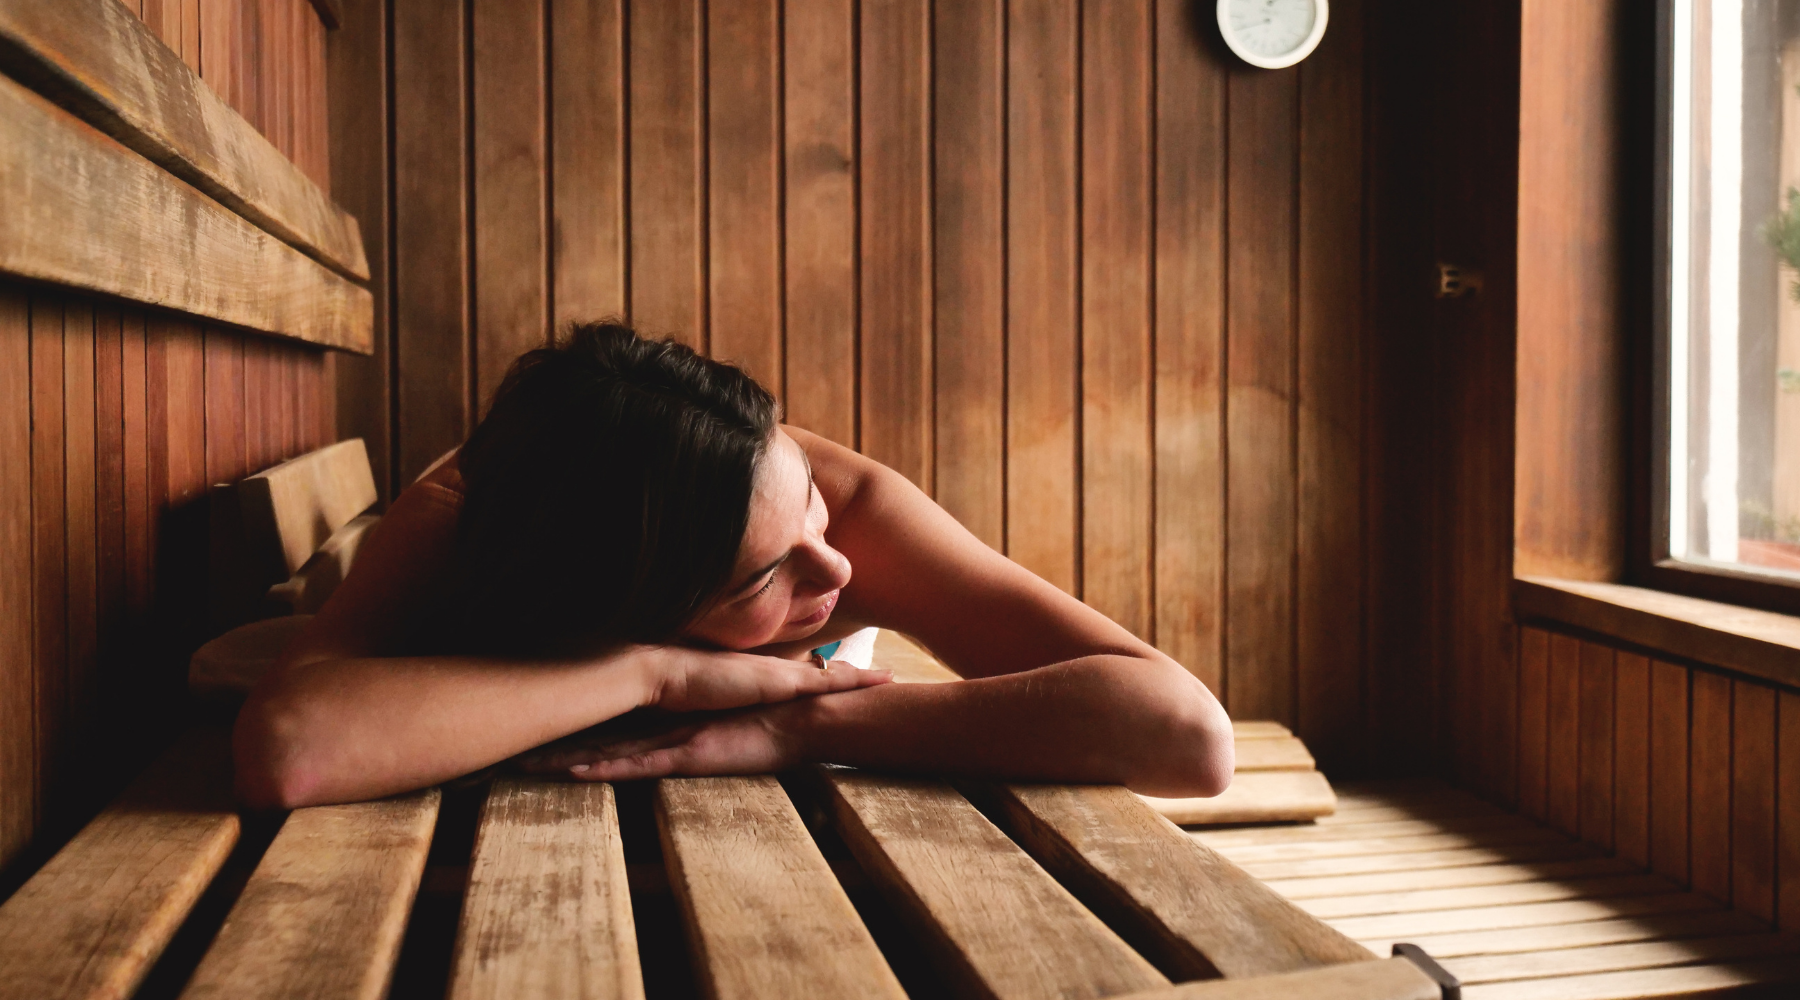 How to Take A Sauna Session to the Next Level